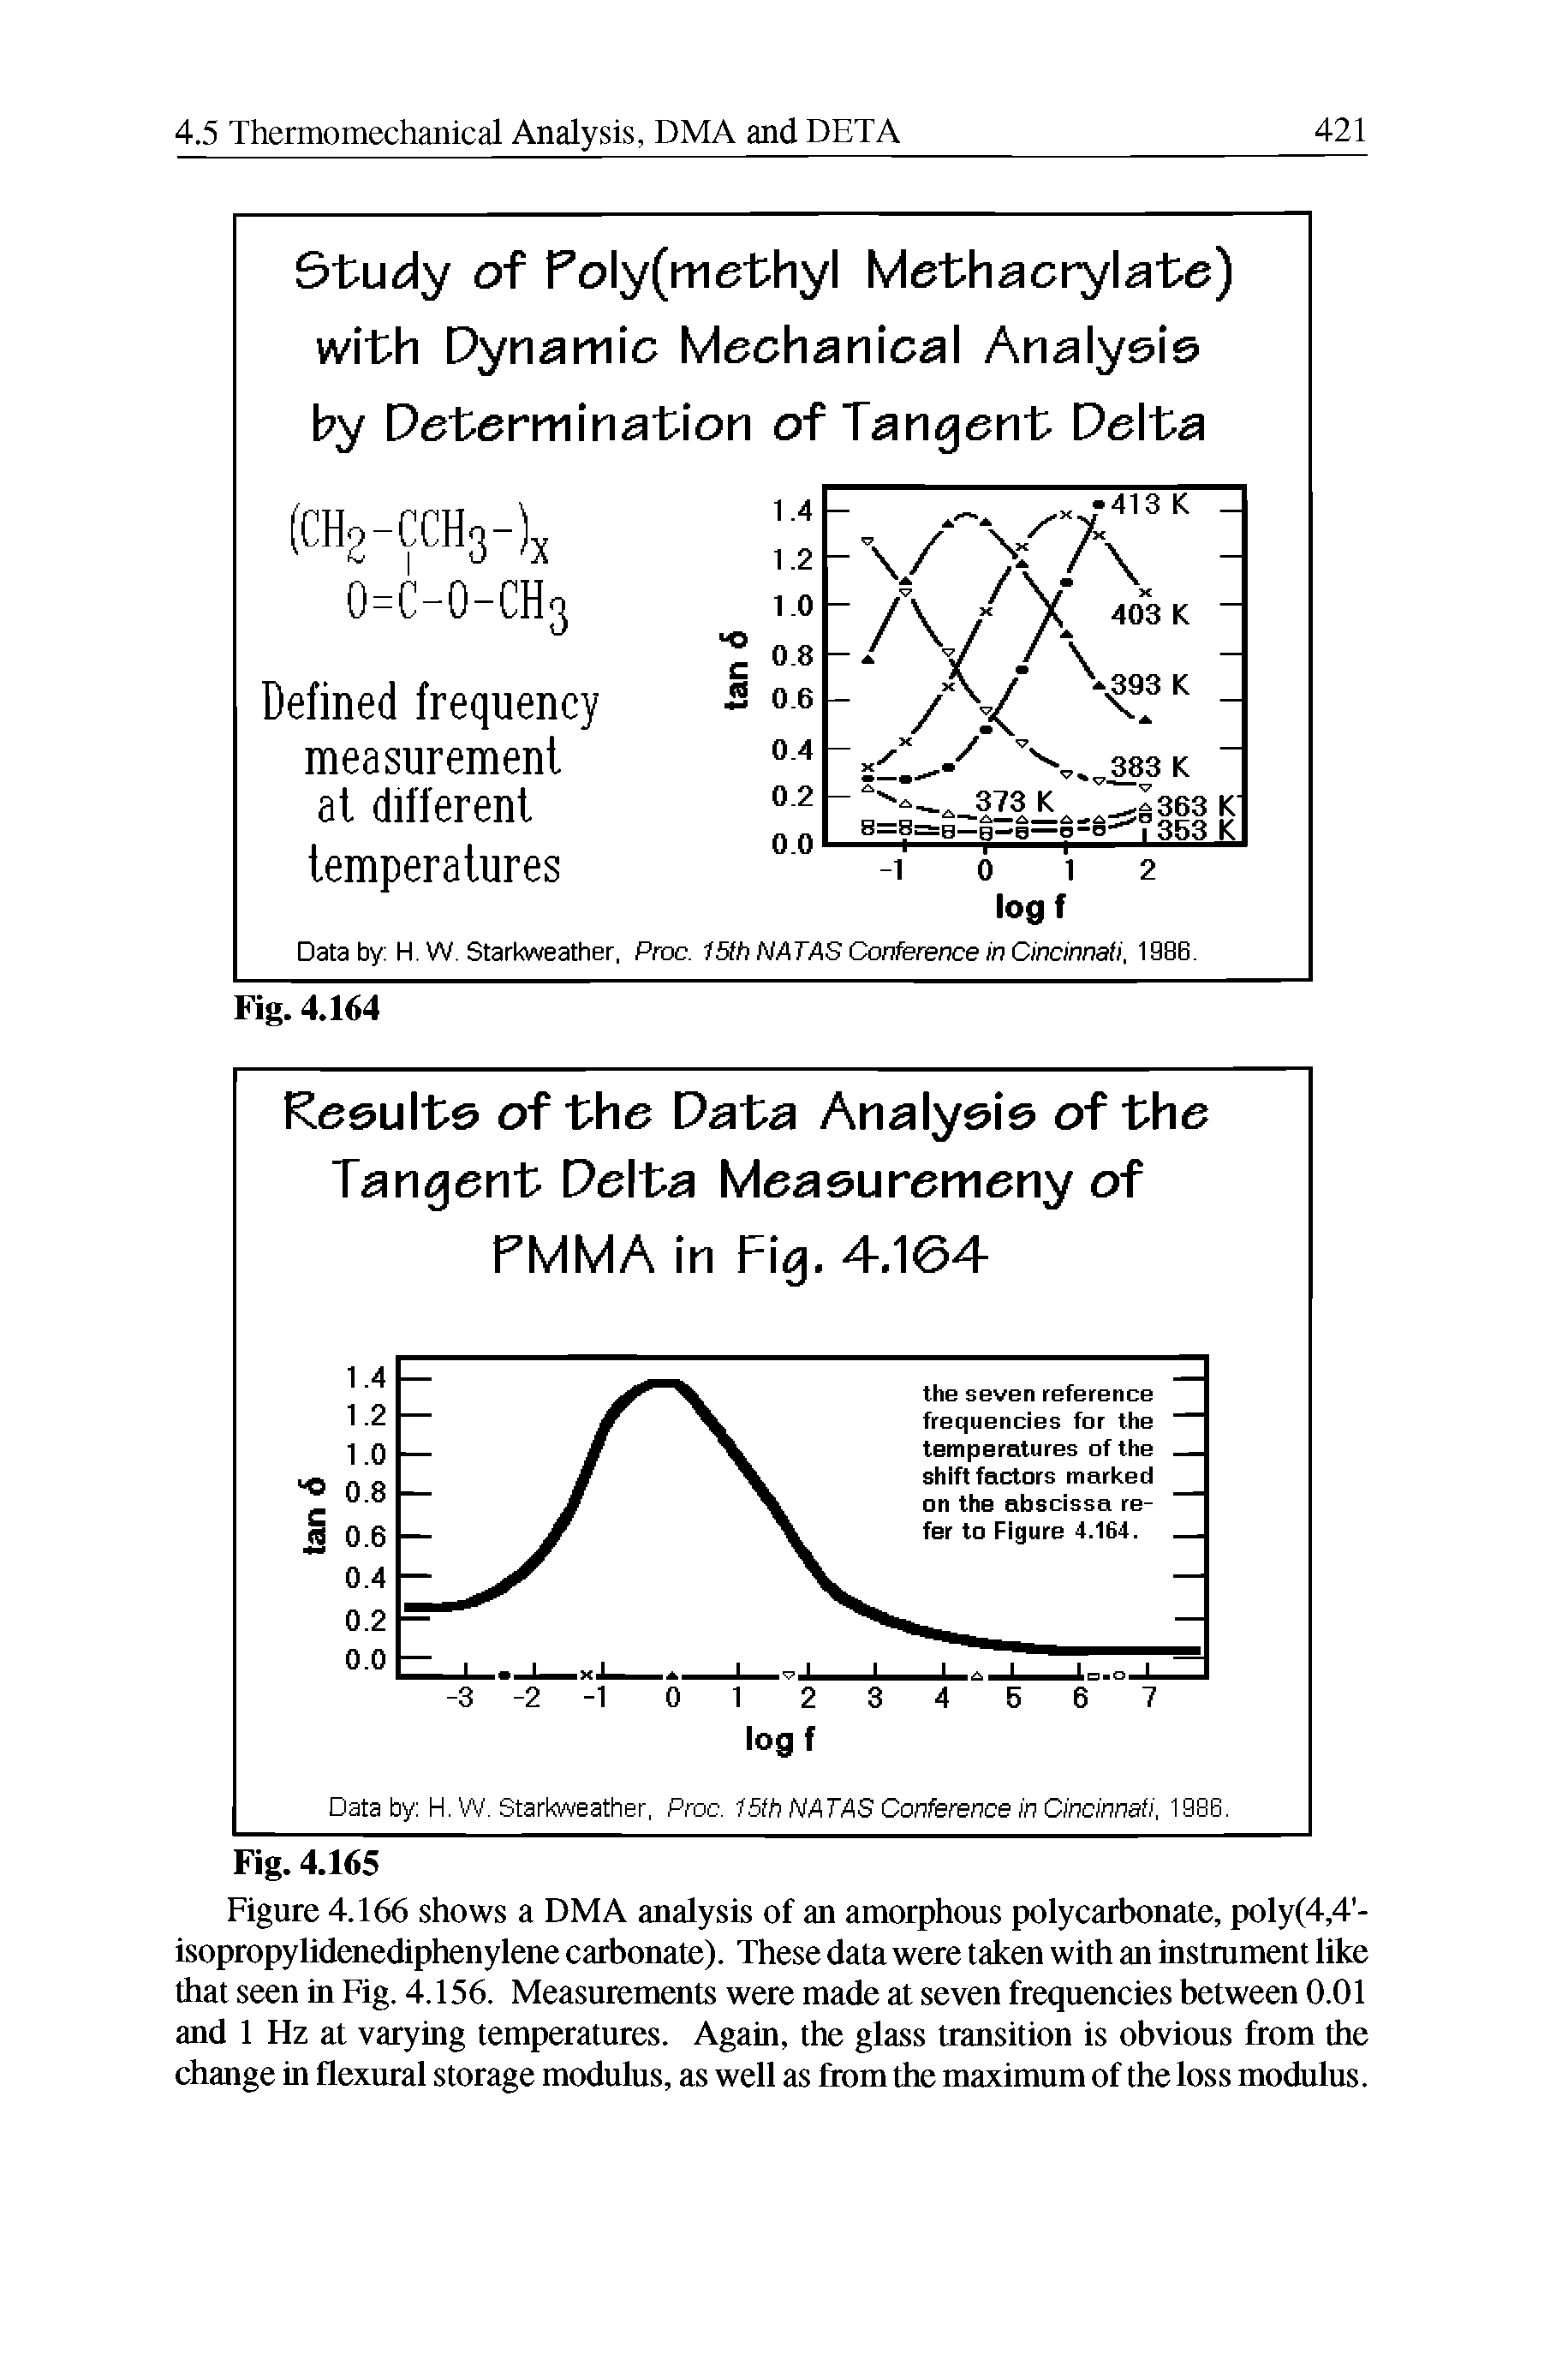 Figure 4.166 shows a DMA analysis of an amorphous polycarbonate, poly(4,4 -isopropylidenediphenylene carbonate). These data were taken with an instrument like that seen in Fig. 4.156. Measurements were made at seven frequencies between 0.01 and 1 Hz at varying temperatures. Again, the glass transition is obvious from the change in flexural storage modulus, as well as from the maximum of the loss modulus.